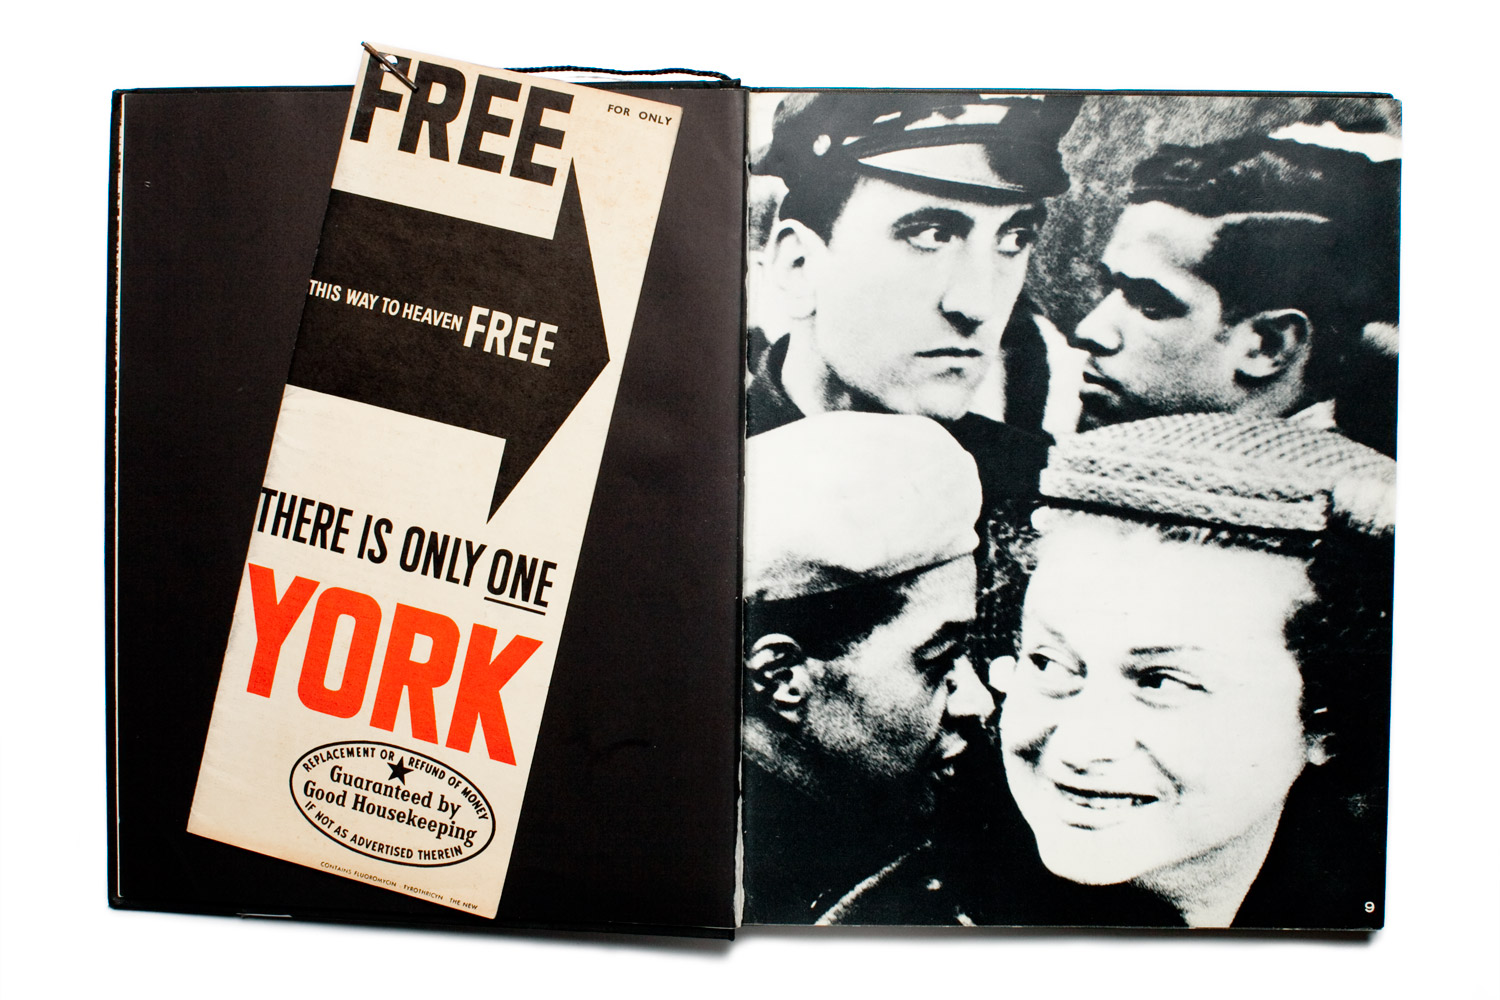 William Klein’s background in painting and graphic design informed his photography and the layout of the book. The publication included a small booklet of advertising and signage, on a cord, bound into the spine.